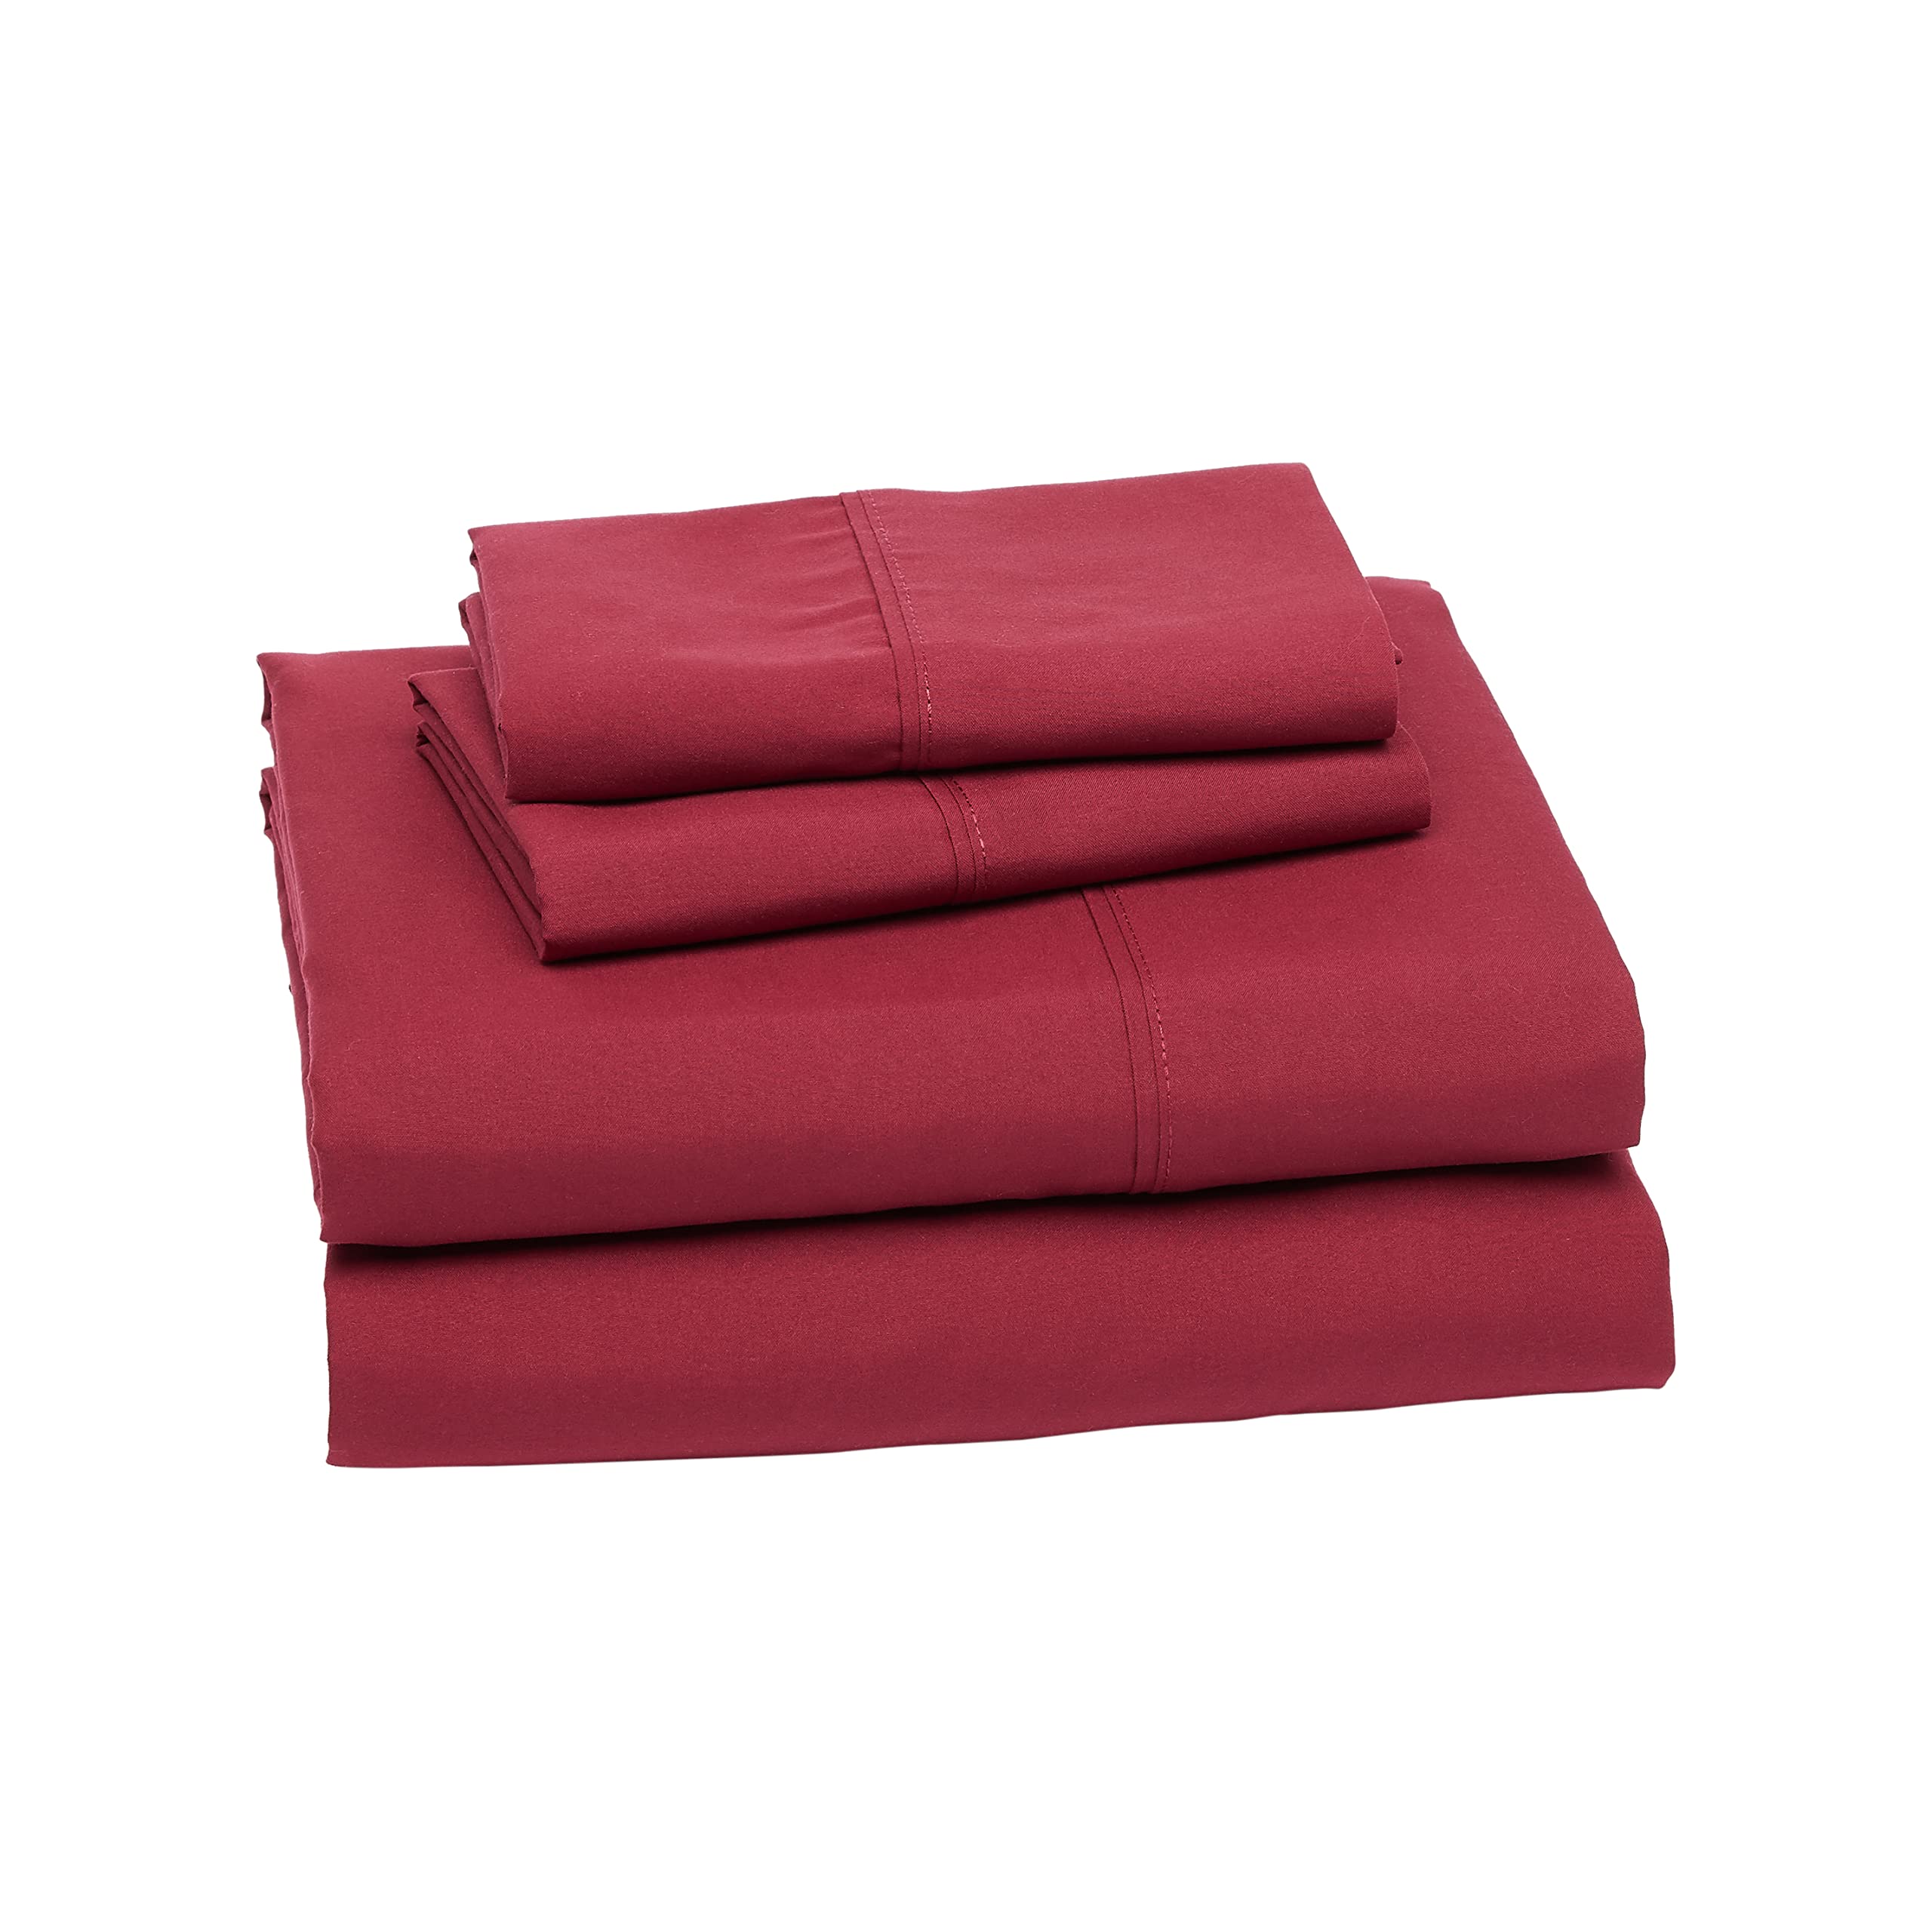 Book Cover Amazon Basics Lightweight Super Soft Easy Care Microfiber 4 Piece Bed Sheet Set With 14